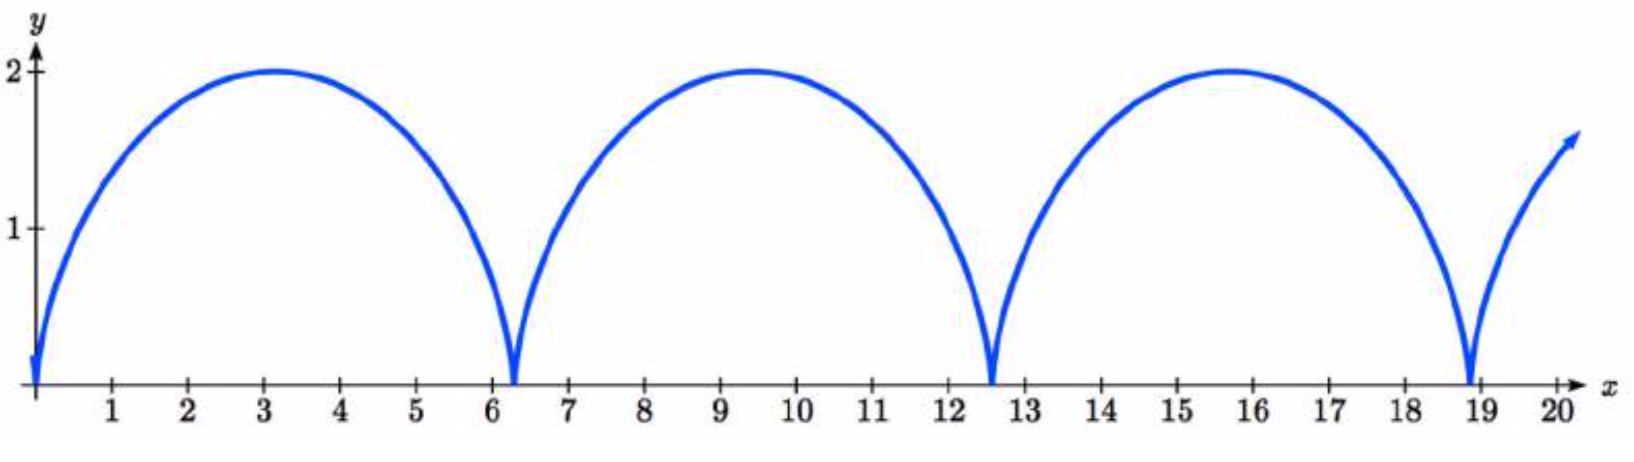 A series of repeating arches. The first starts at the origin, curves concave down up to pi comma 2, then curves concave down to pi comma 0.  That same shape repeats two more times.